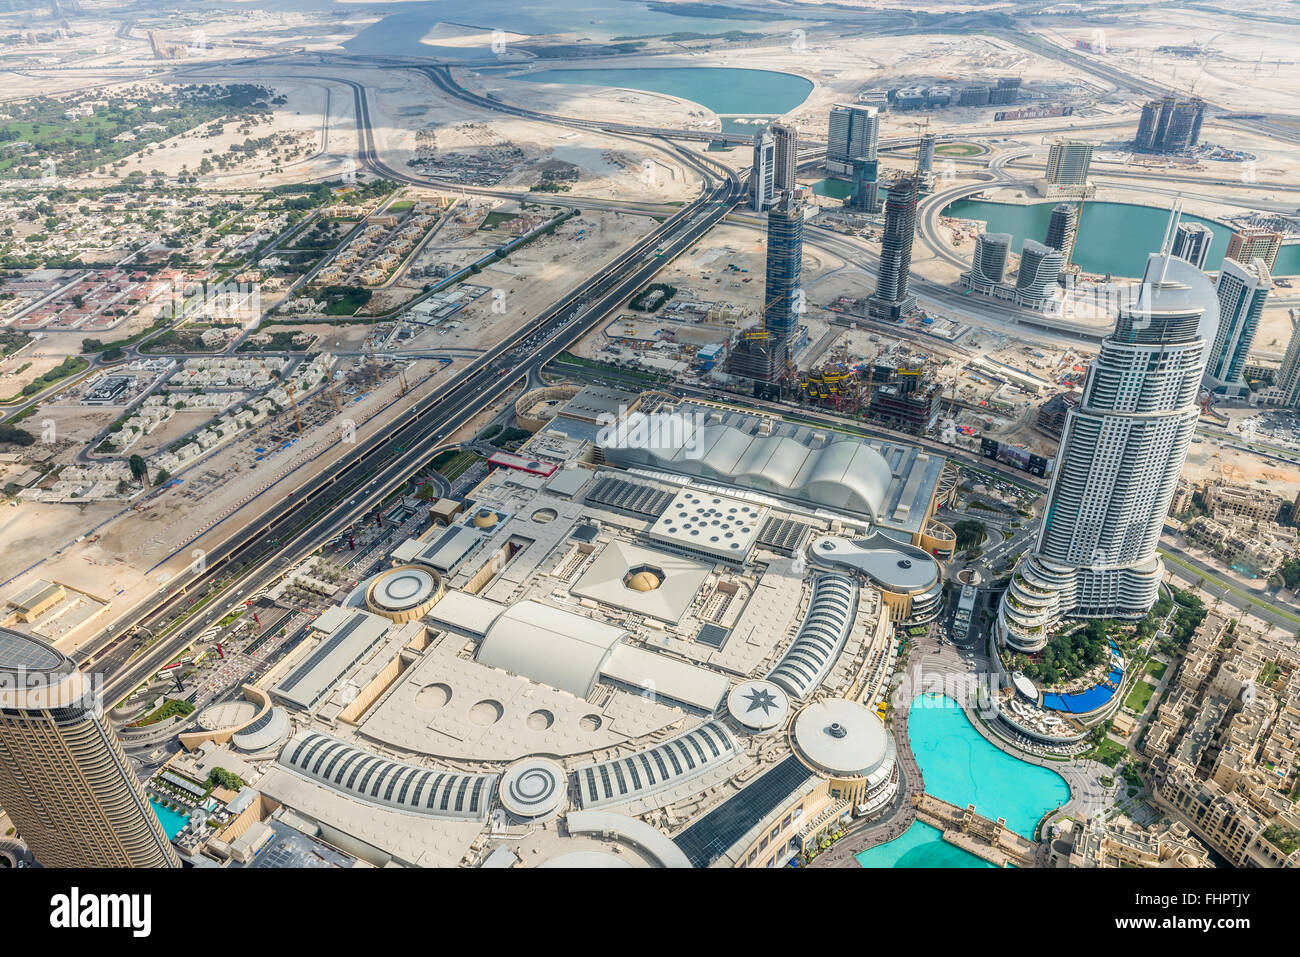 Dubai, United Arab Emirates - Dec 2, 2014: Aerial shot of Dubai including The Address hotel, which will be closed indefinitely a Stock Photo